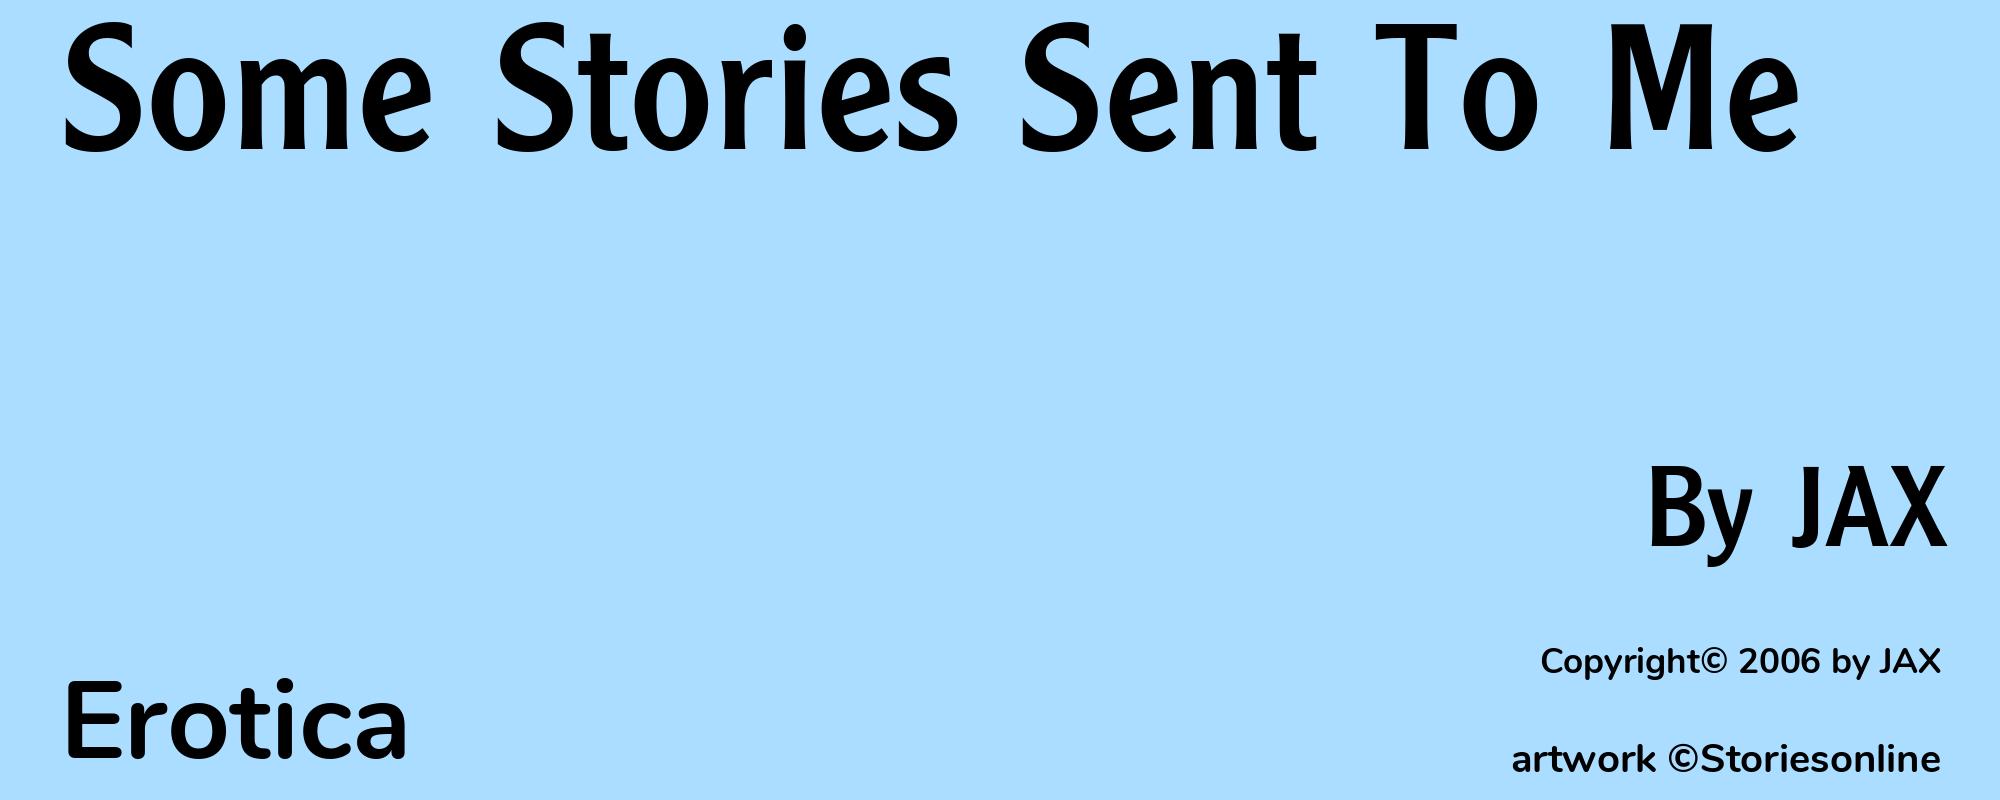 Some Stories Sent To Me - Cover